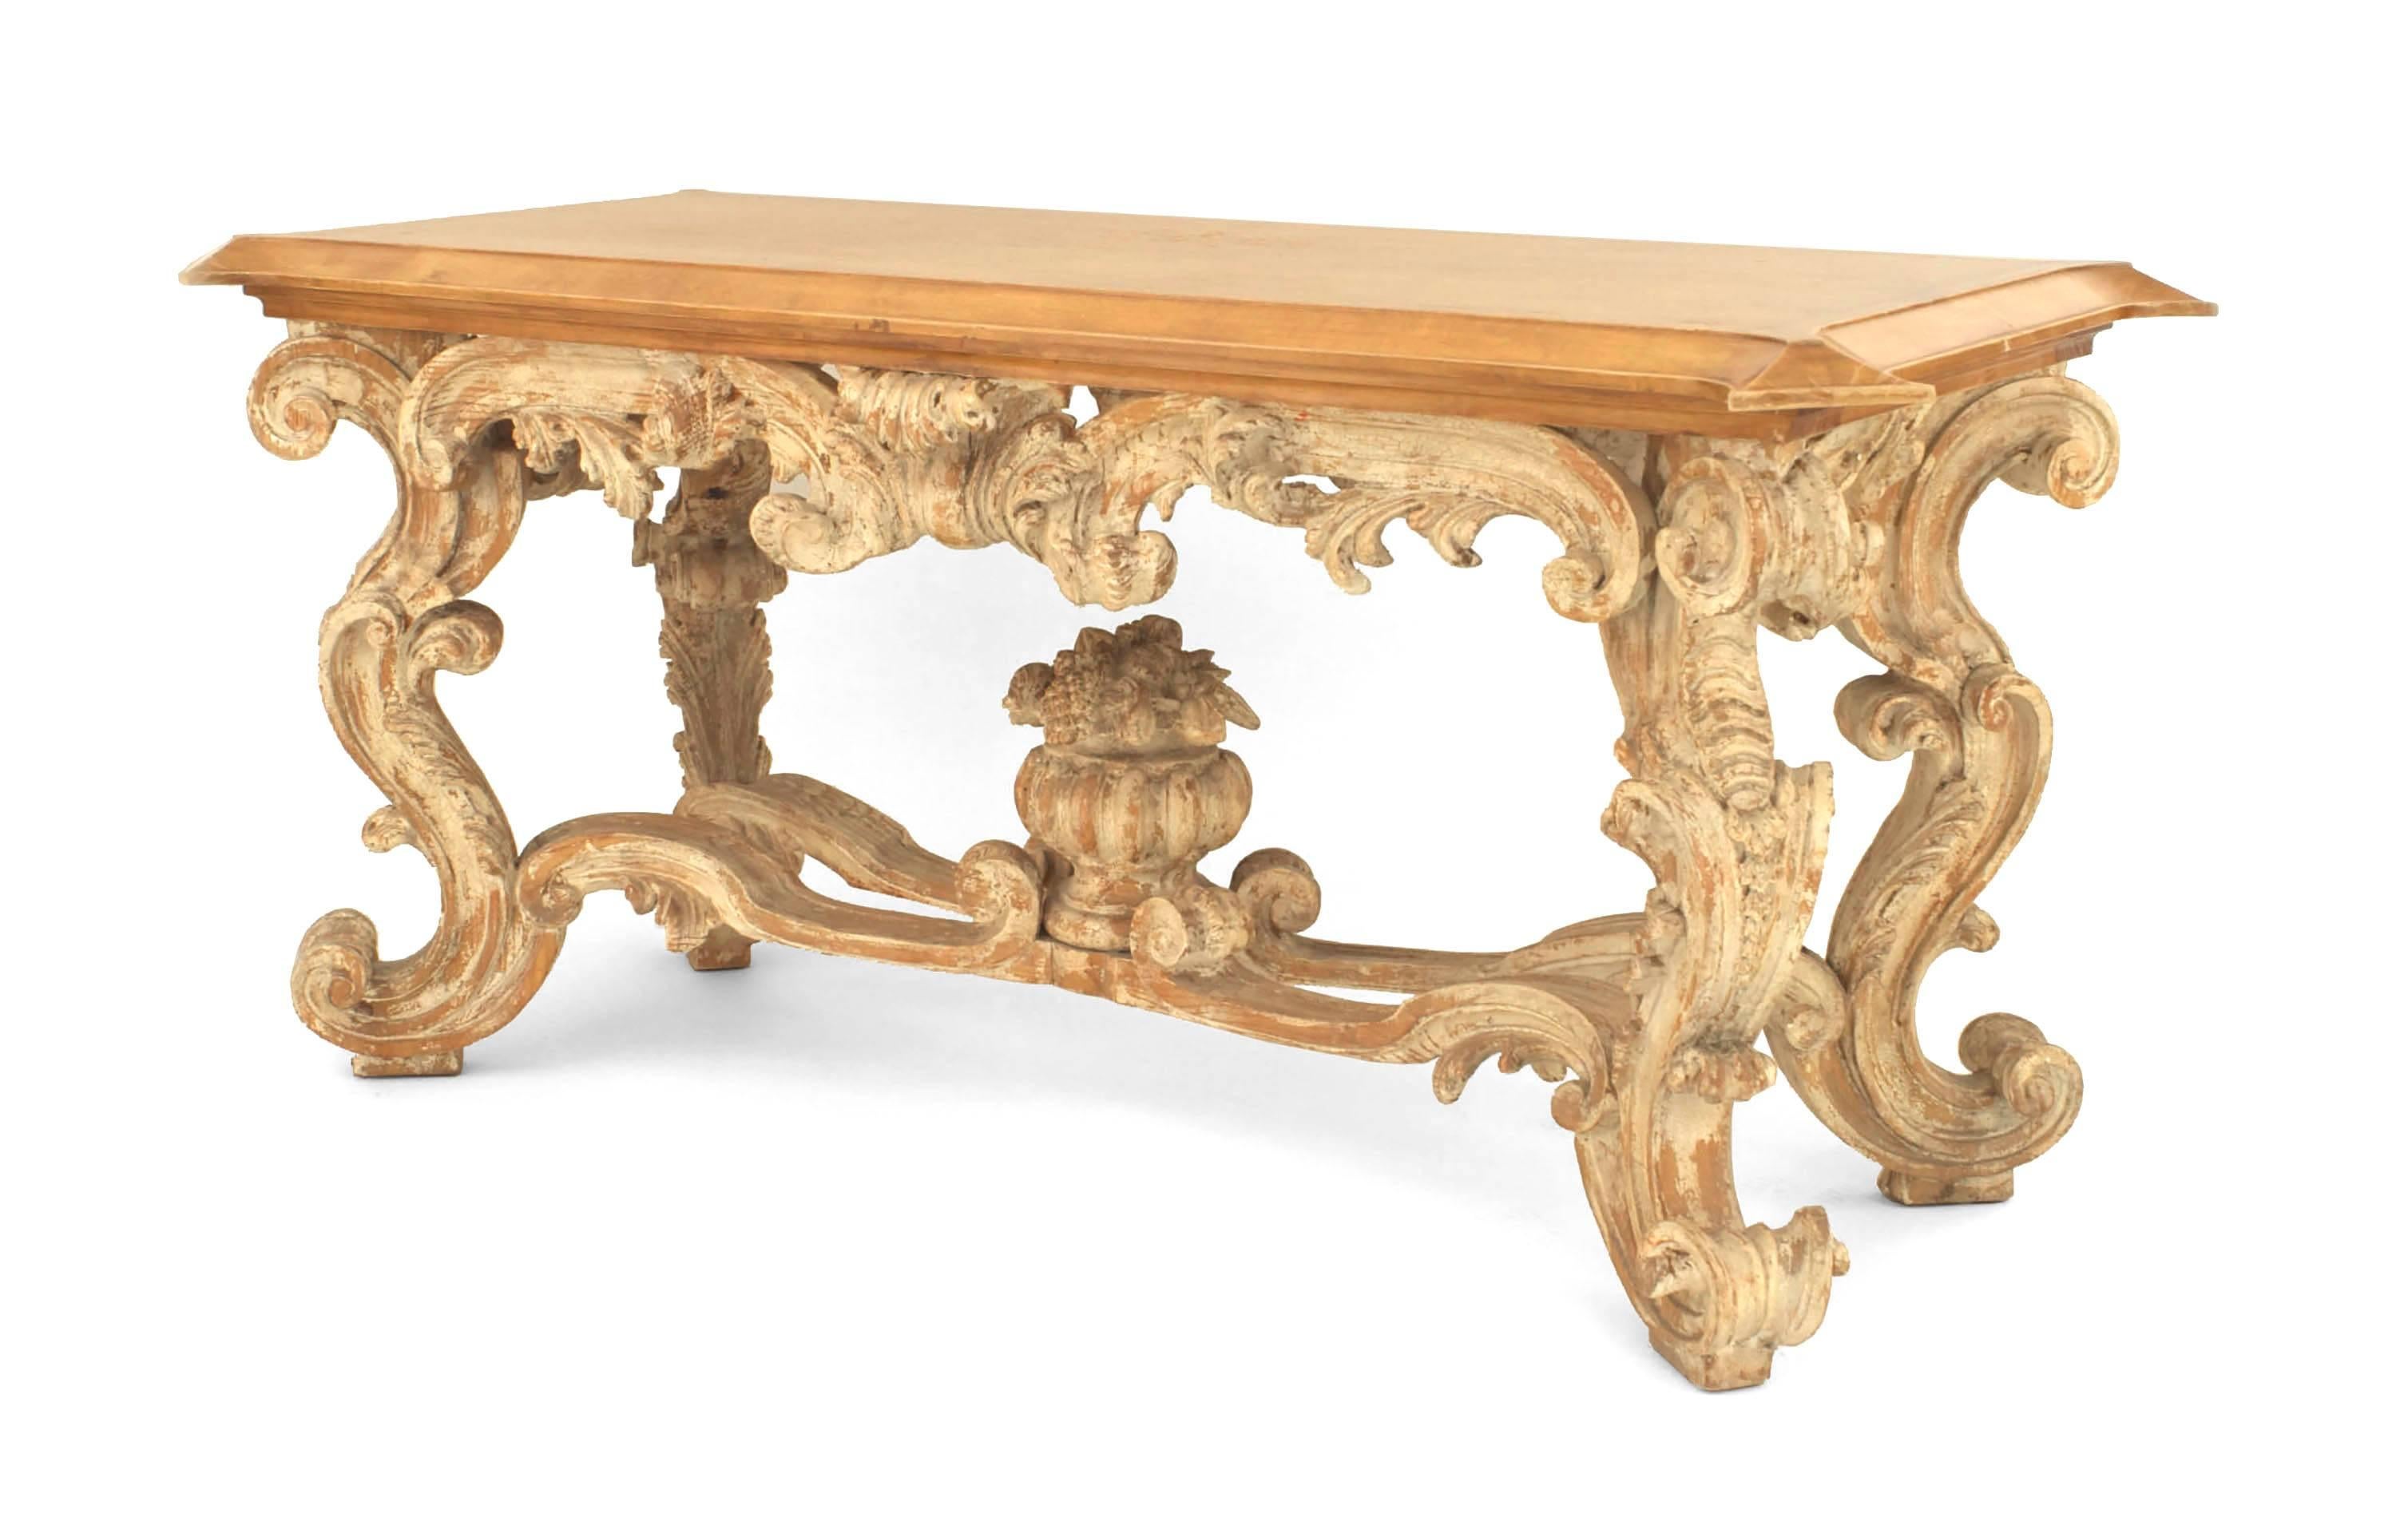 Italian Venetian style (19/20th century) stripped and white painted Rococo carved
rectangular center table with carved 